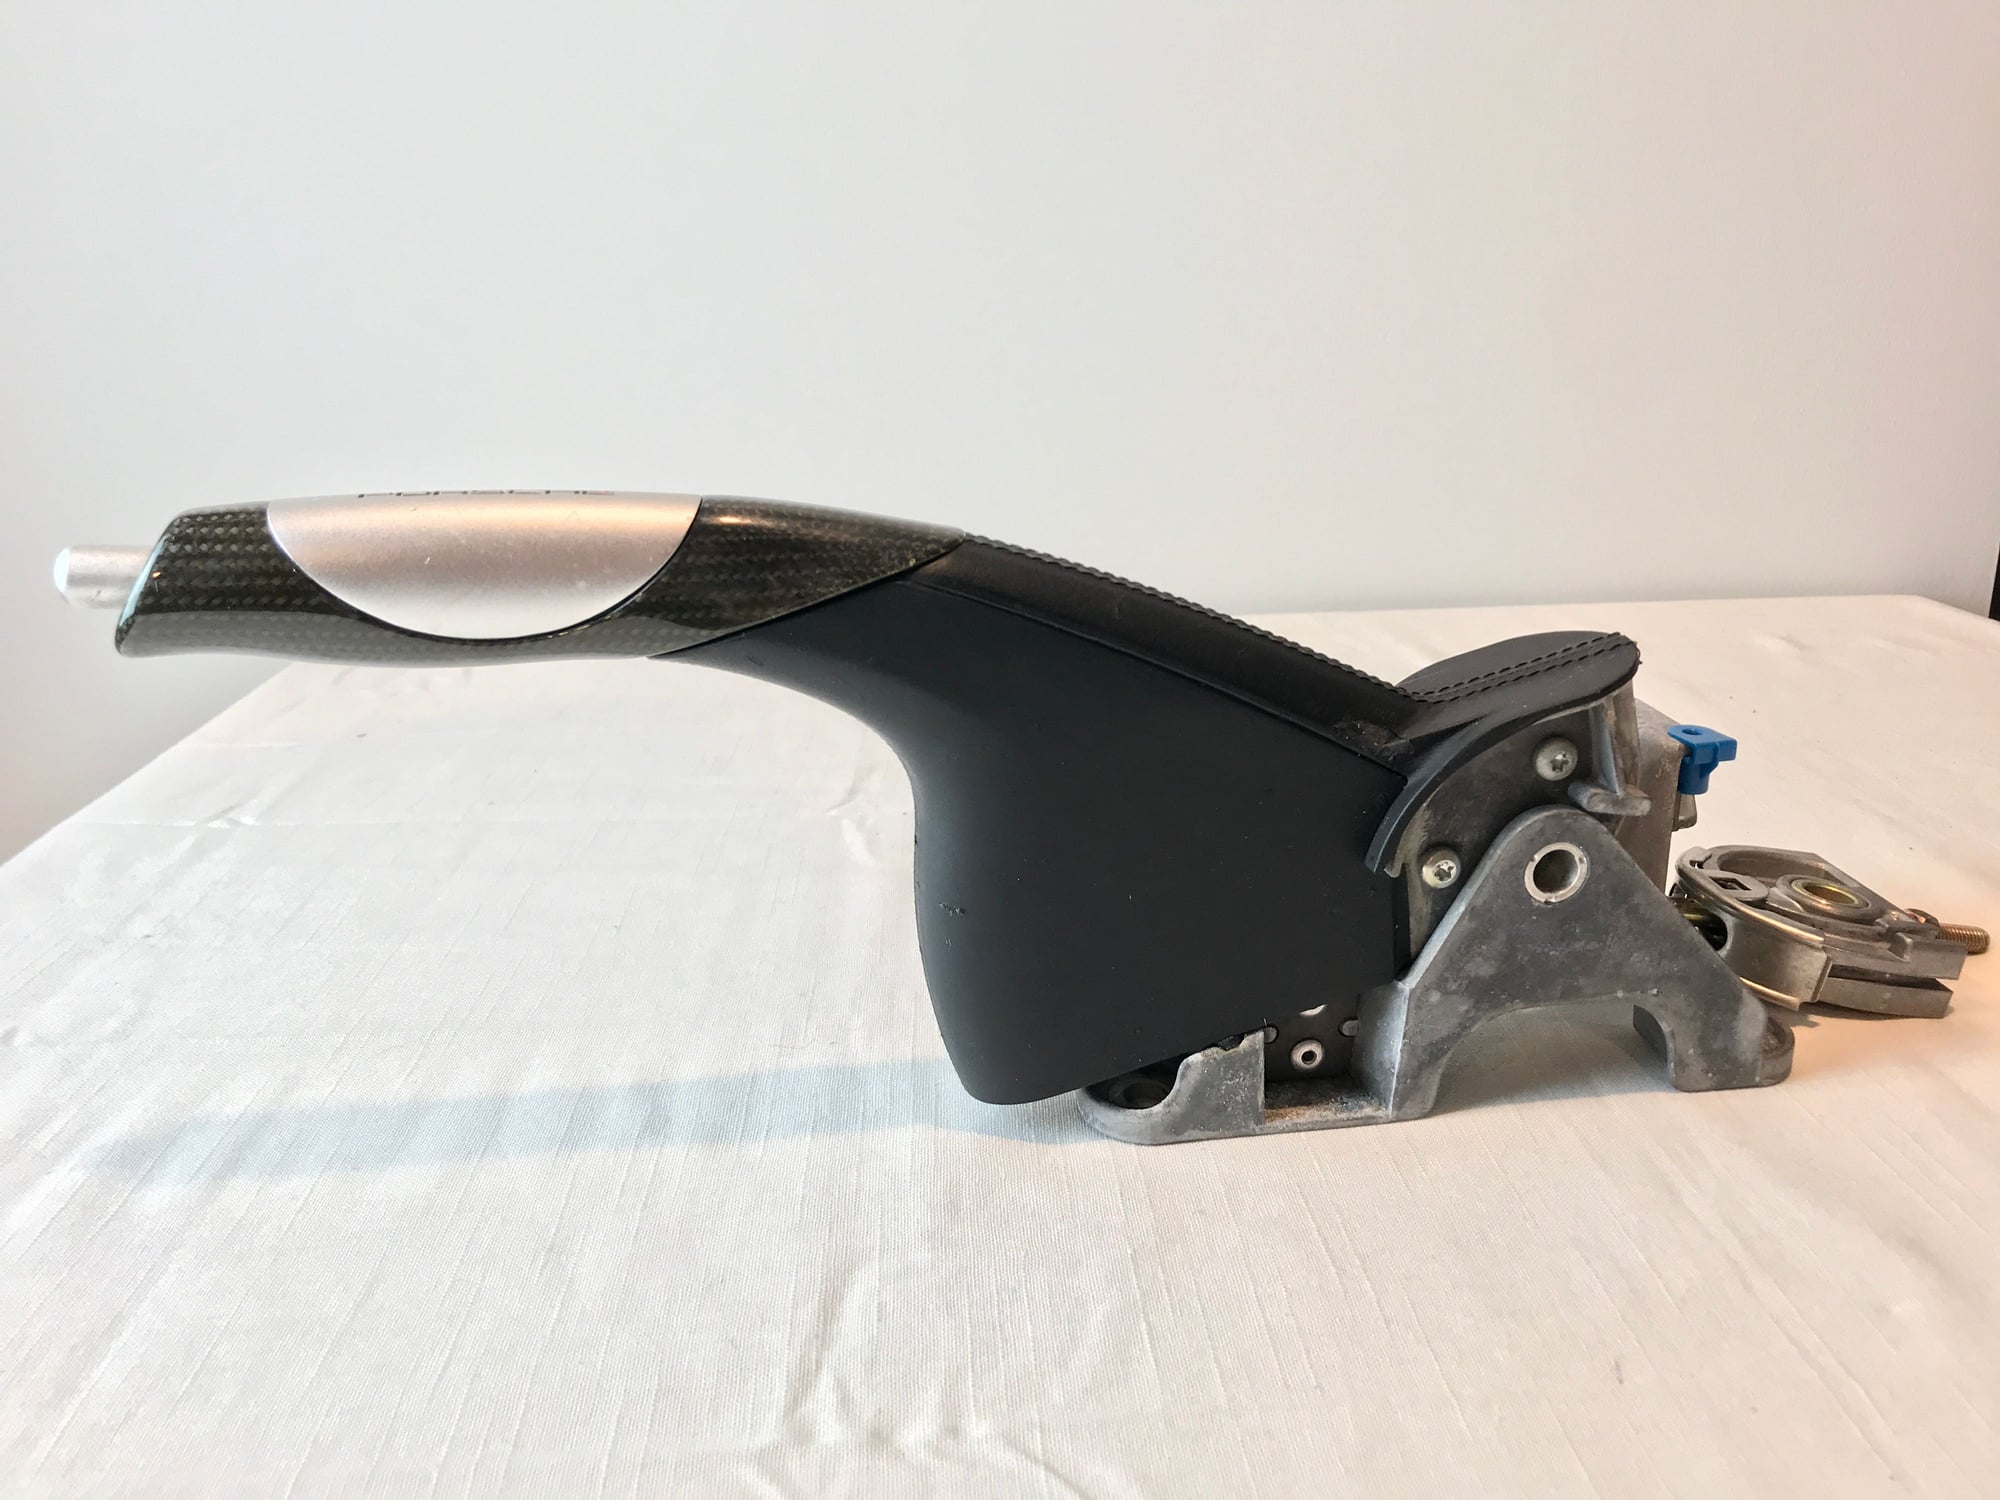 Interior/Upholstery - 996/986 Carbon Interior Part Out 3K of Parts - Used - 1999 to 2004 Porsche 911 - 1996 to 2004 Porsche Boxster - Mountainside, NJ 07092, United States